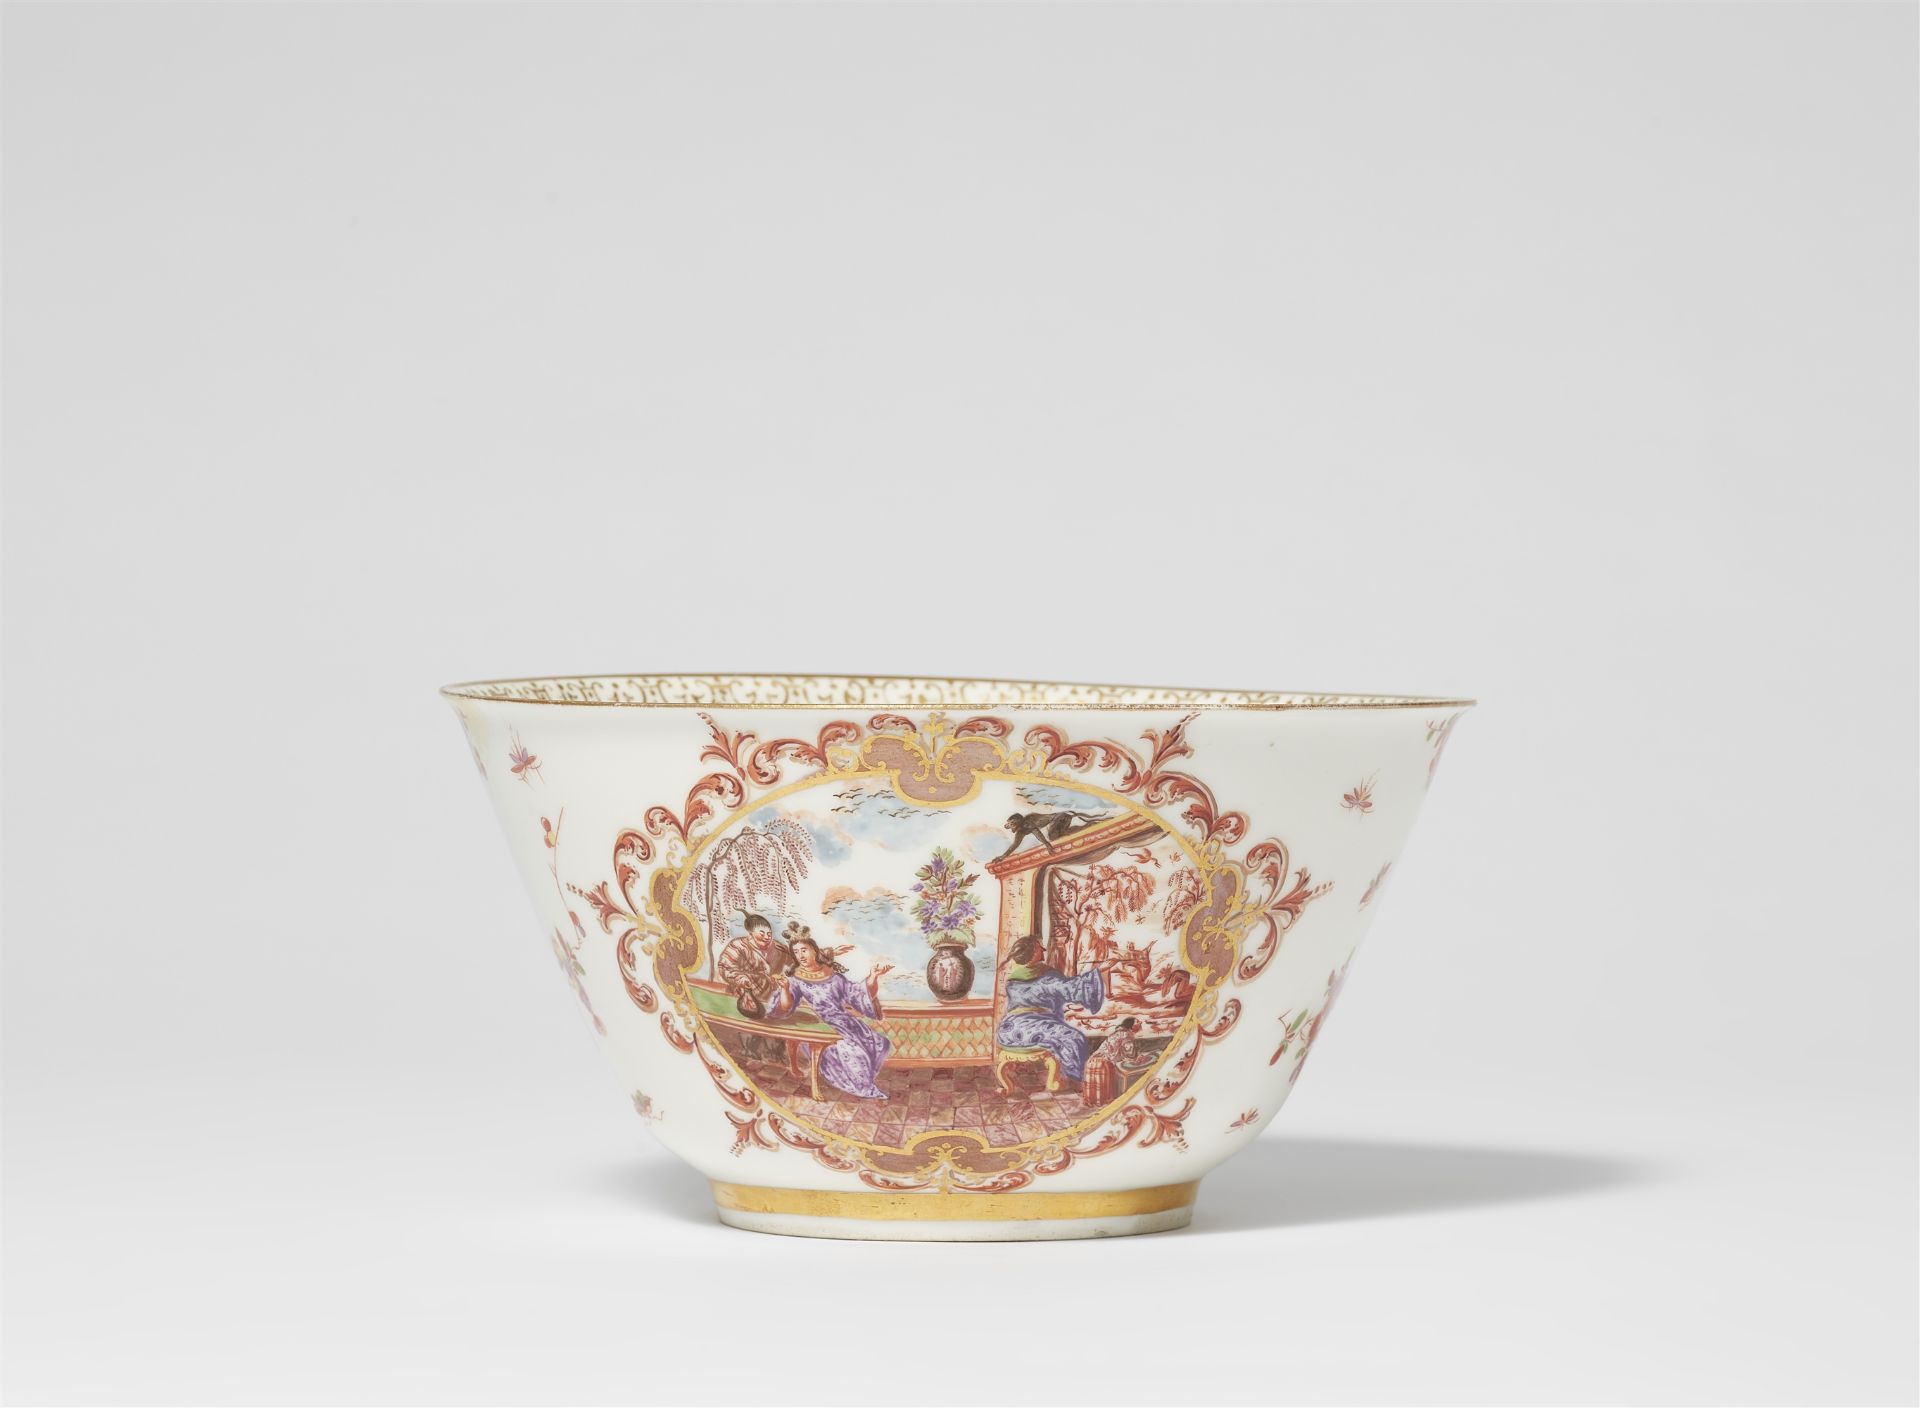 A rare Meissen porcelain slop bowl with early Hoeroldt Chinoiseries